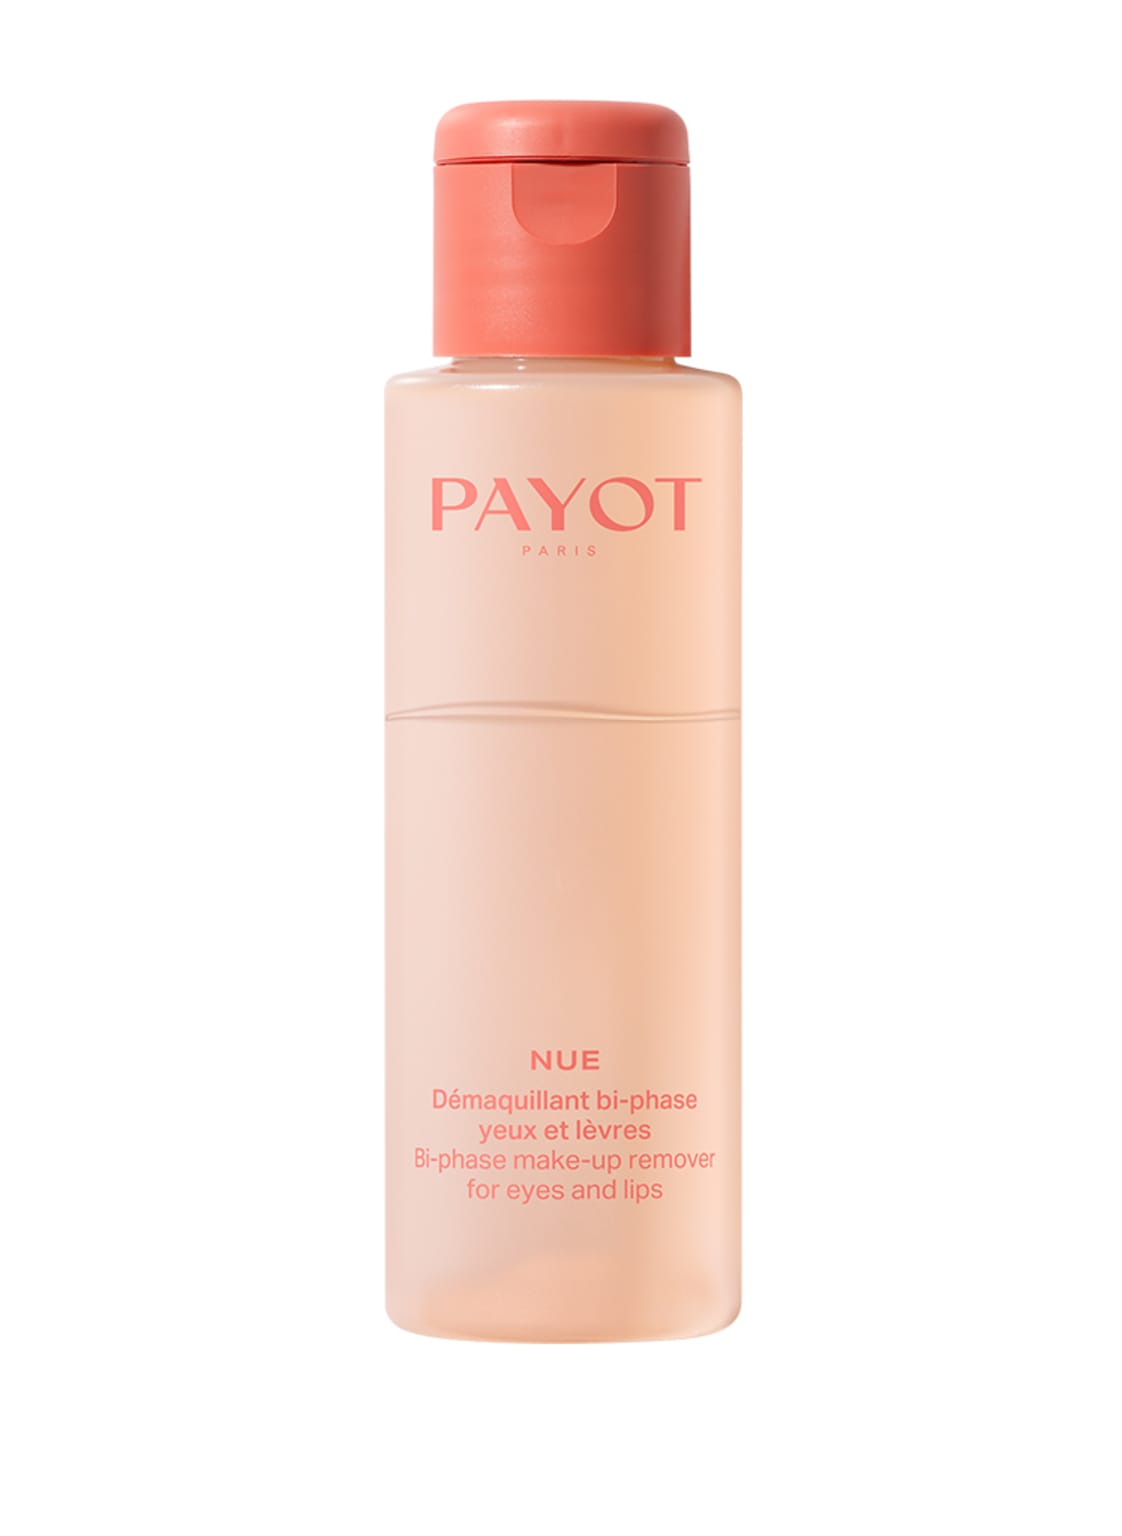 Payot Nue Bi-Phase Make-up Remover For Eyes and Lips 100 ml von PAYOT